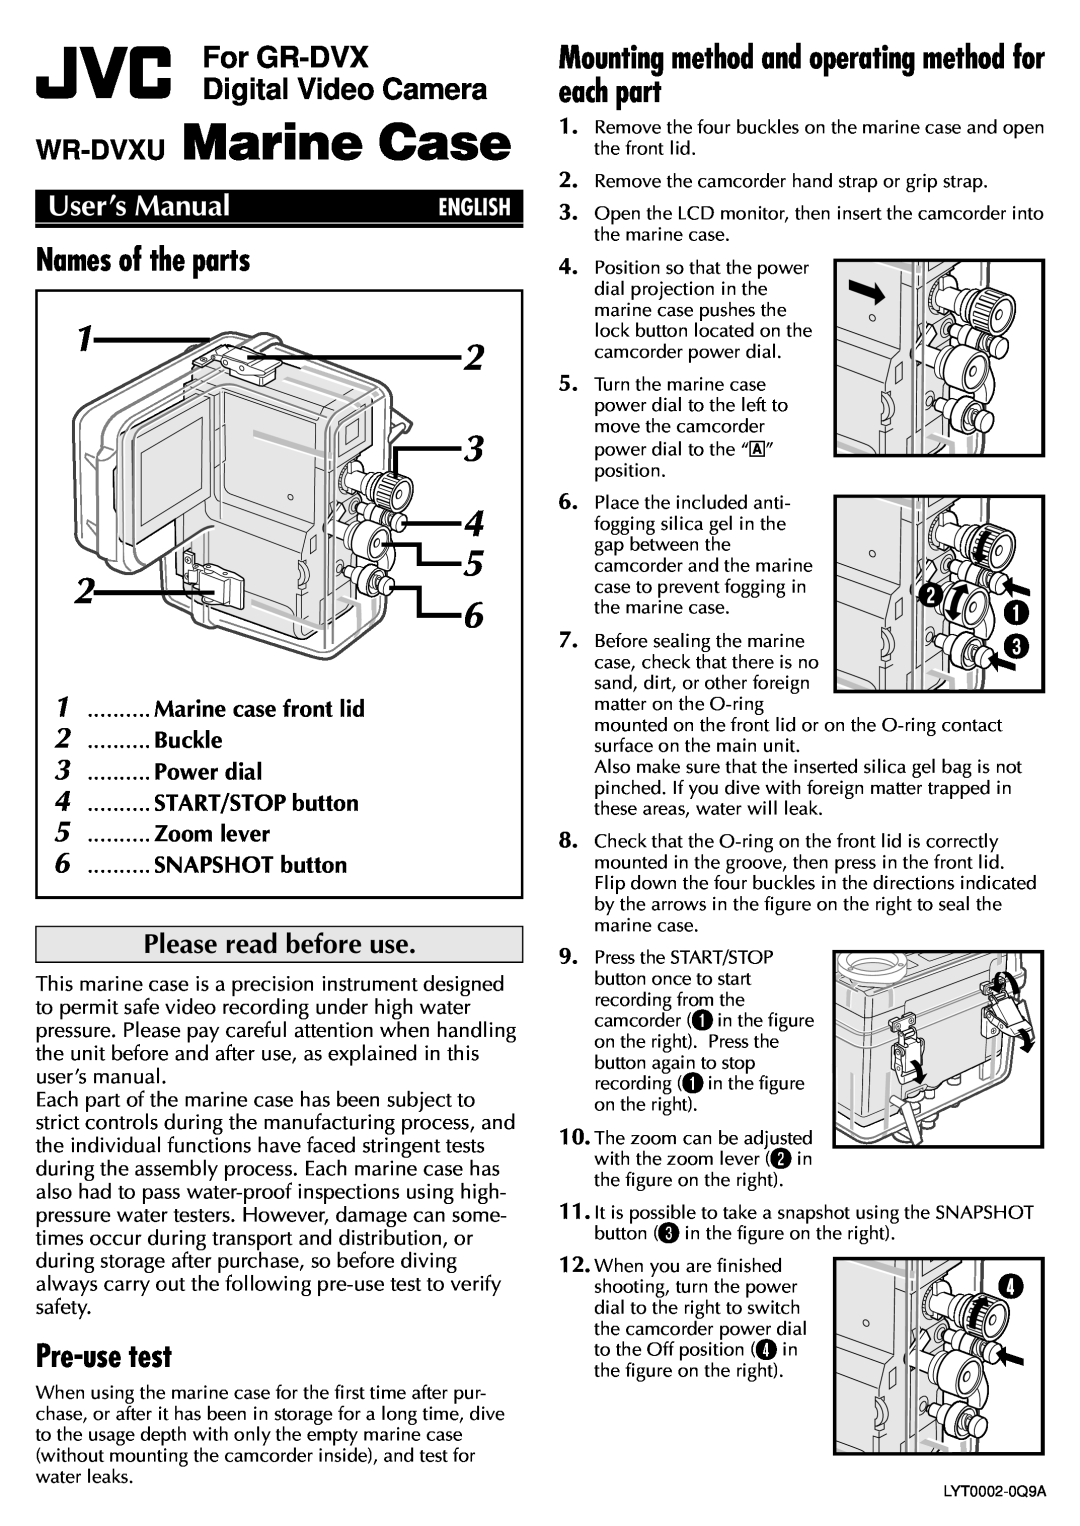 JVC WR-DVXU user manual Names of the parts, Pre-use test, Mounting method and operating method for each part, Buckle 